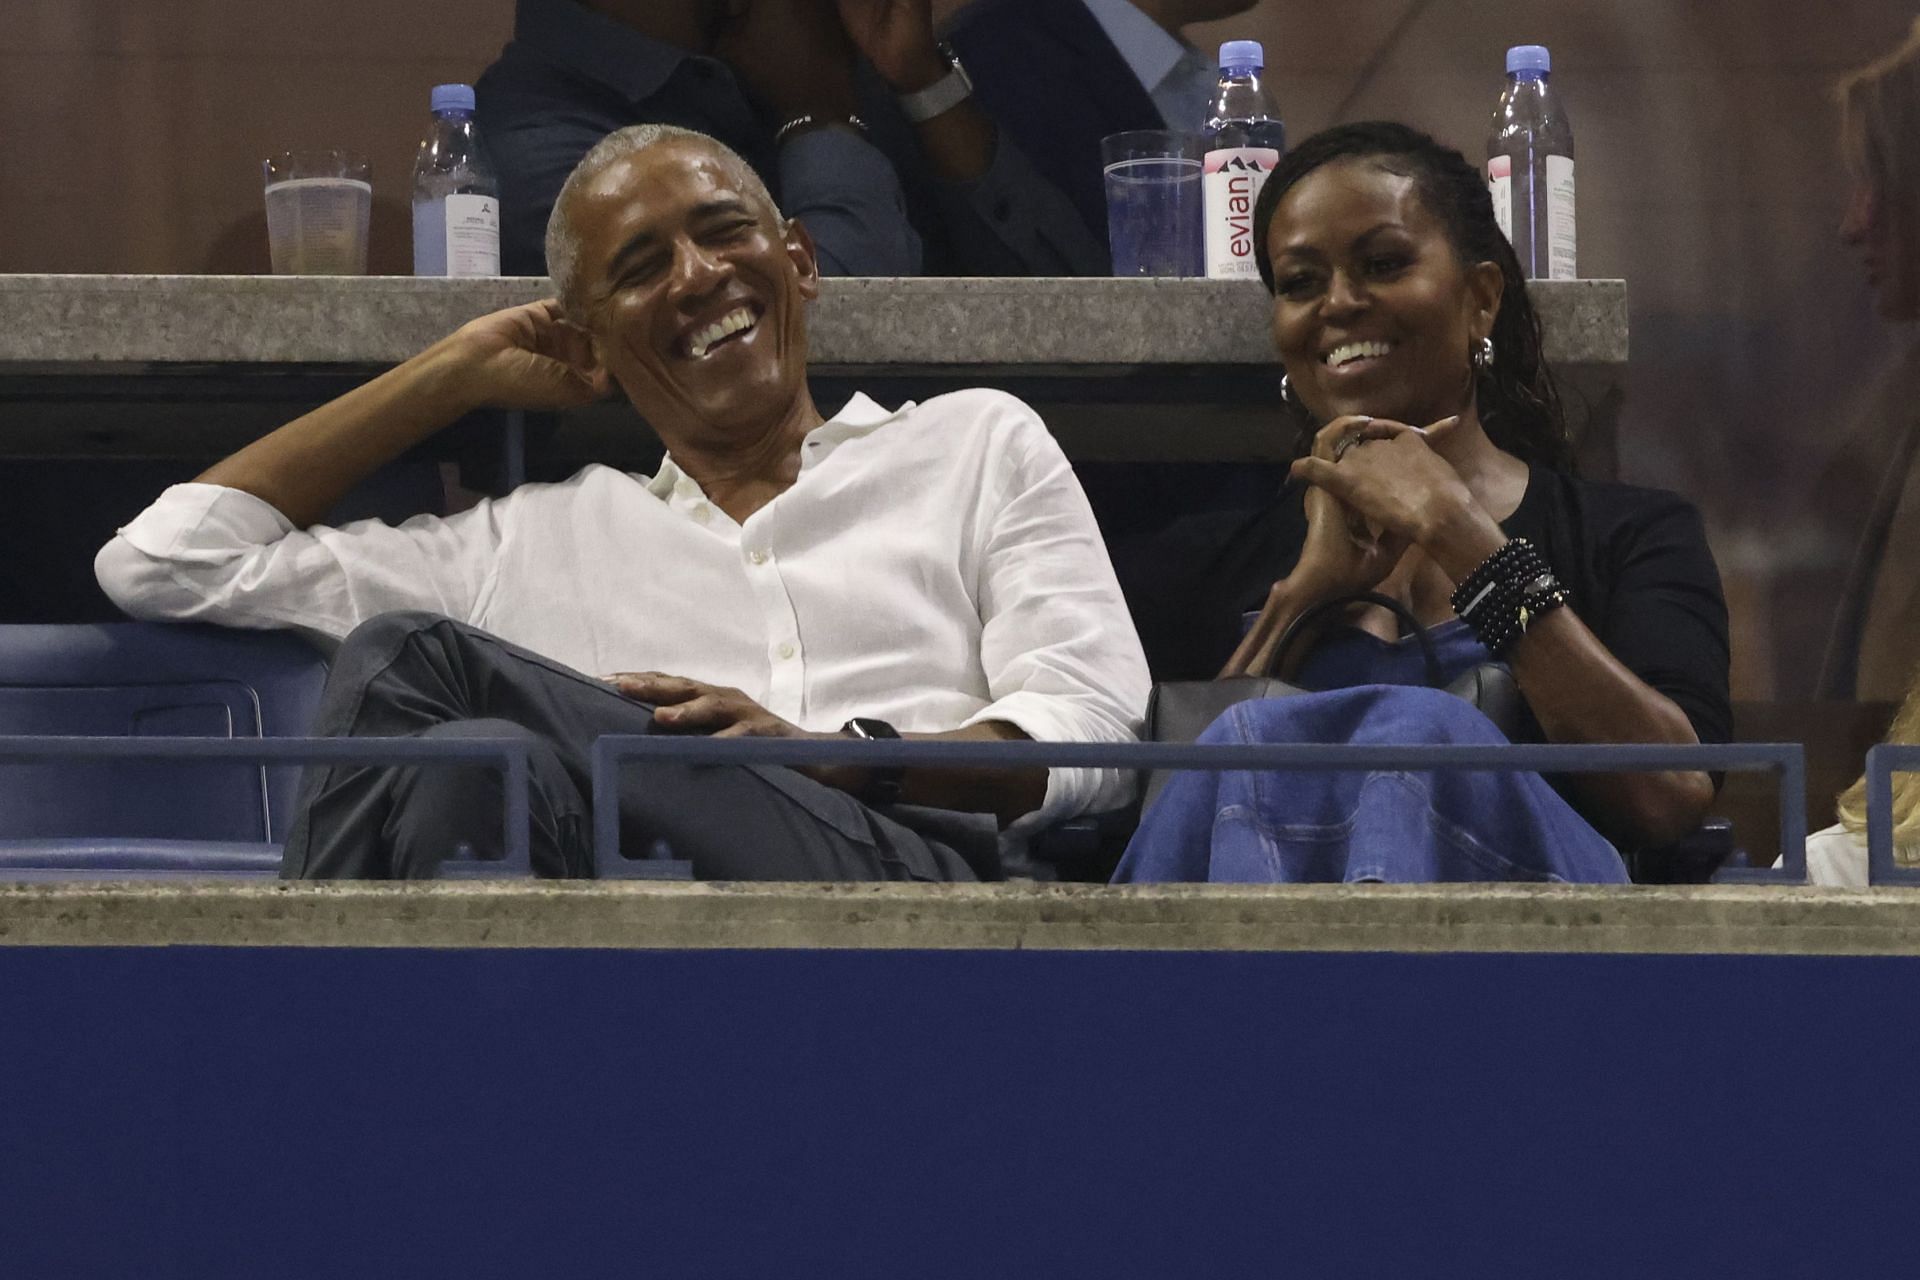 Barack and Michelle Obama at Flushing Meadows